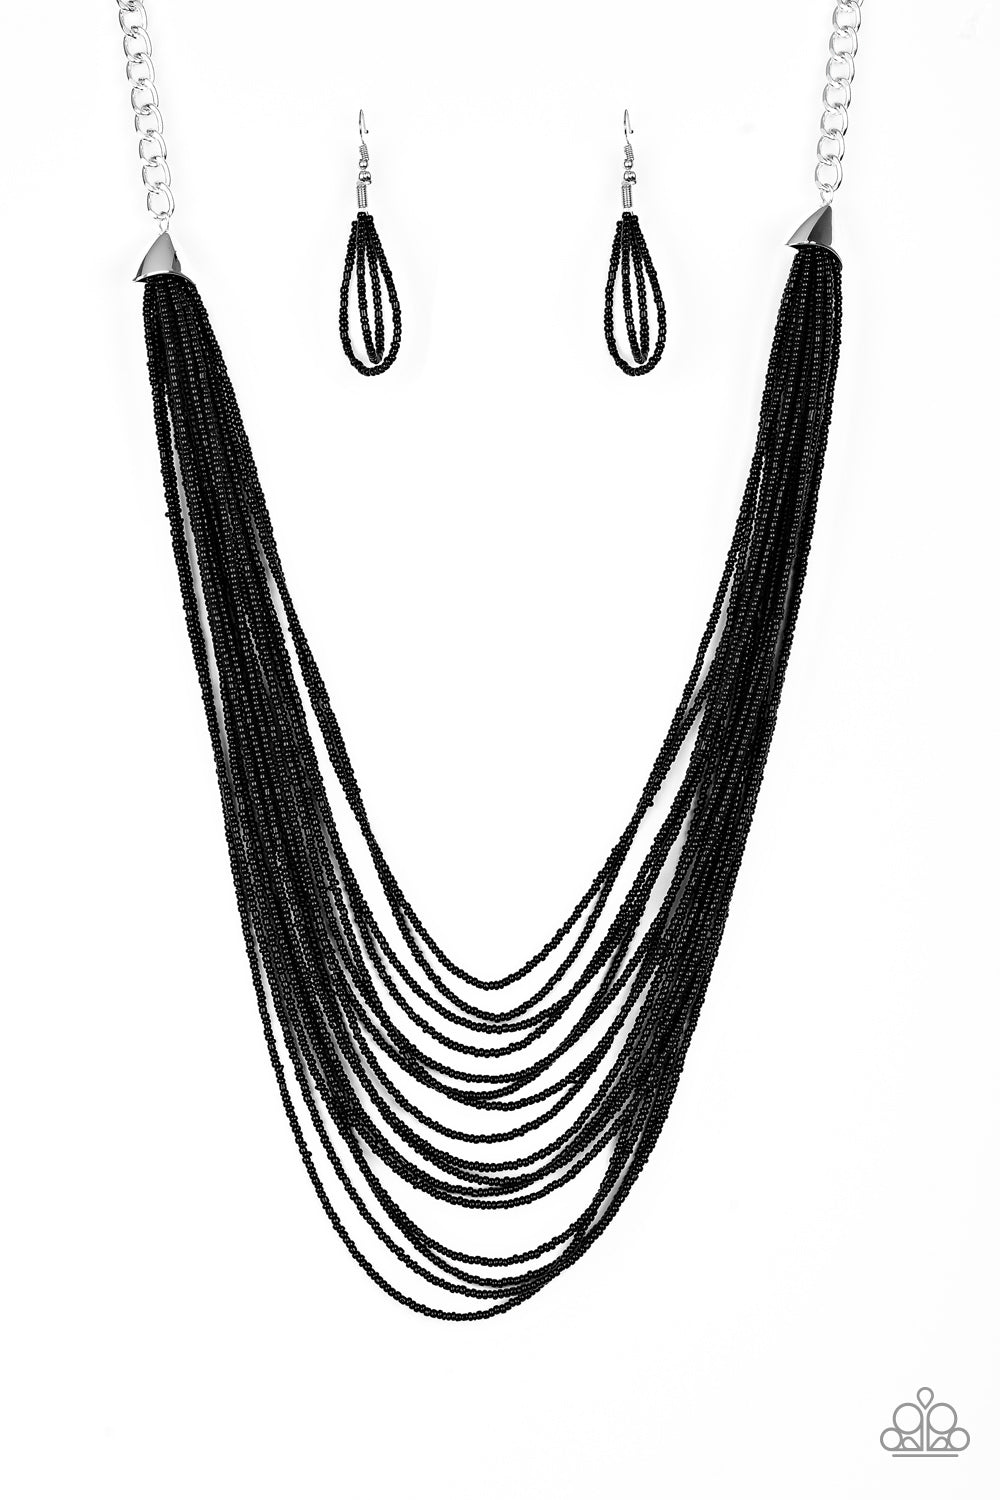 ** 1094 Peacefully Pacific - Black Seedbead Necklace Paparazzi Accessories